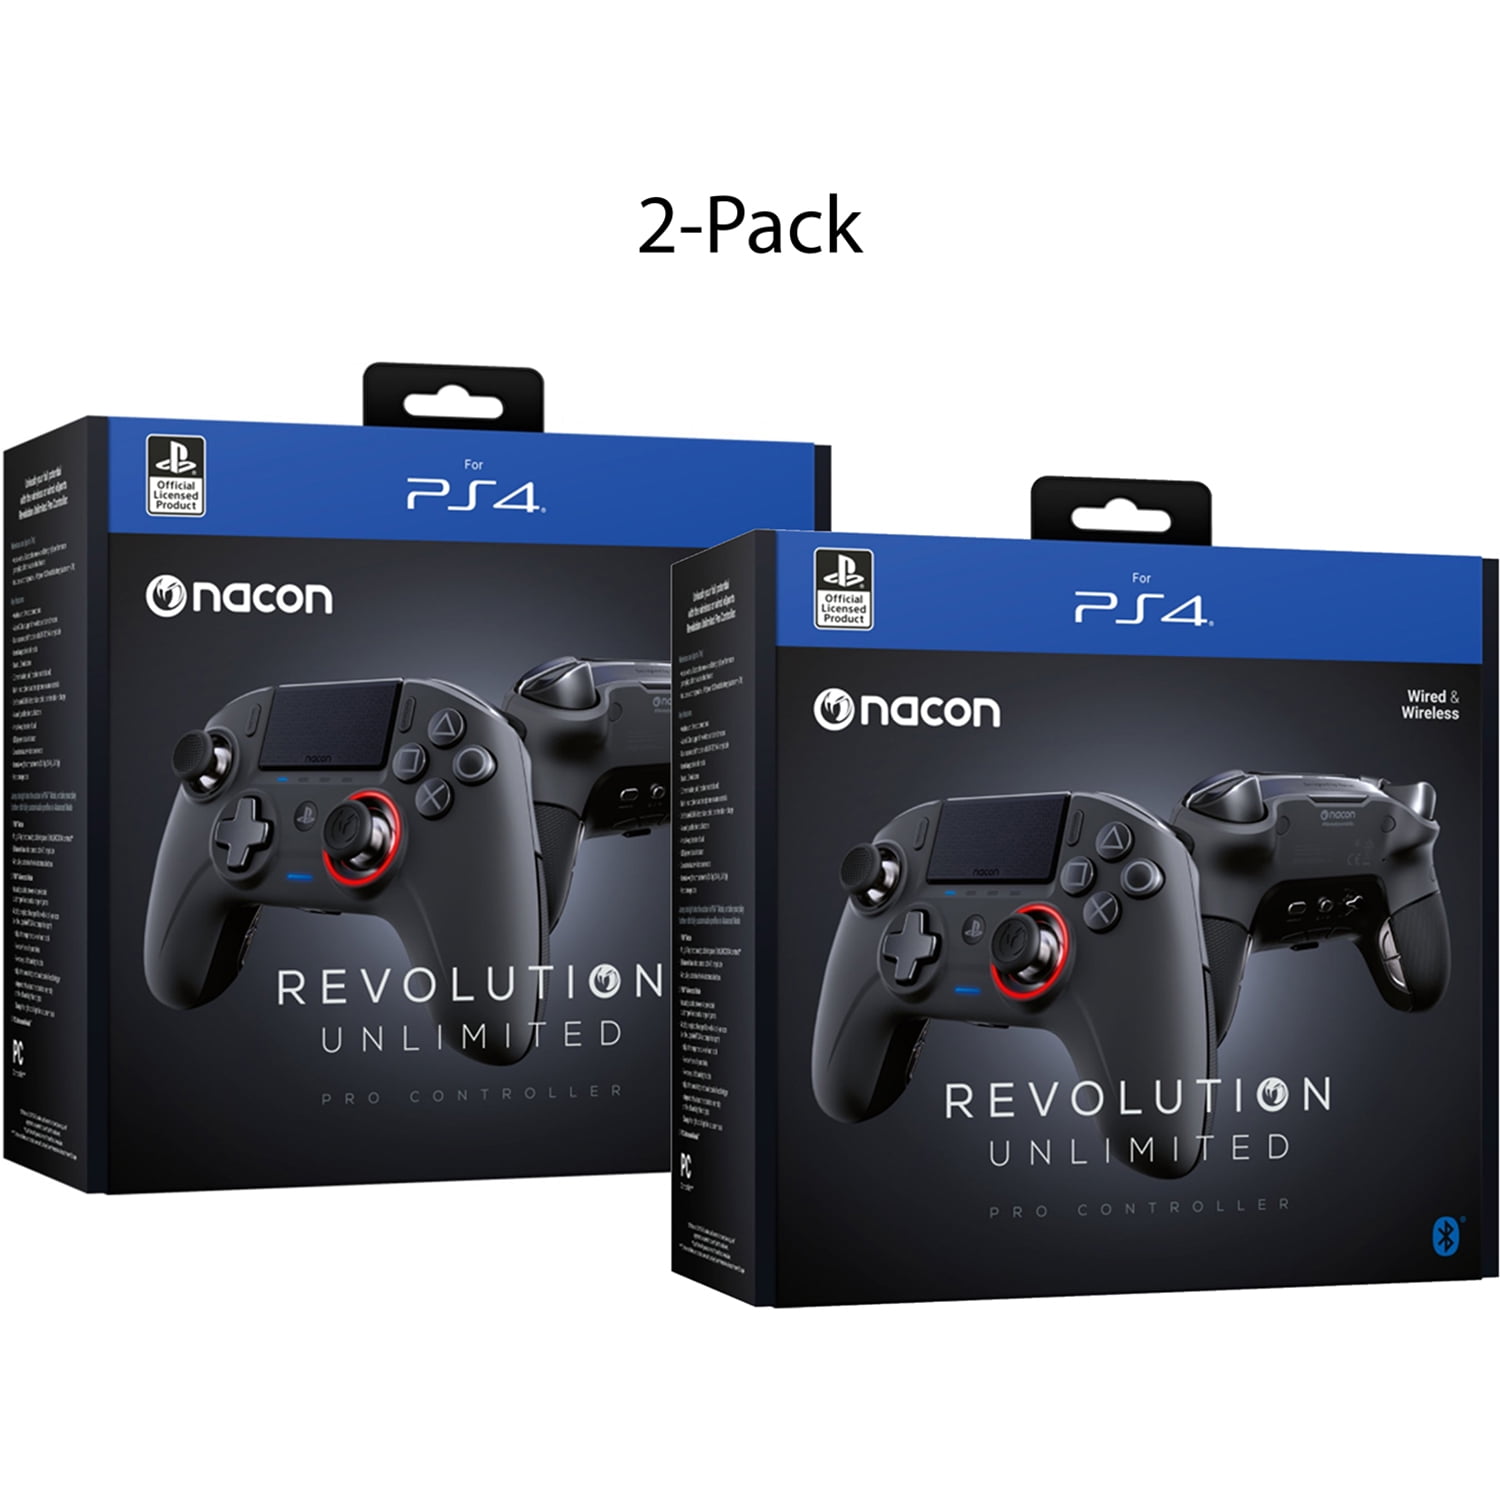 NACON Controller Esports Revolution Unlimited Pro V3 PS4 PC - Wireless / Wired - Nacon-311608 2 Pack Team Bundle -